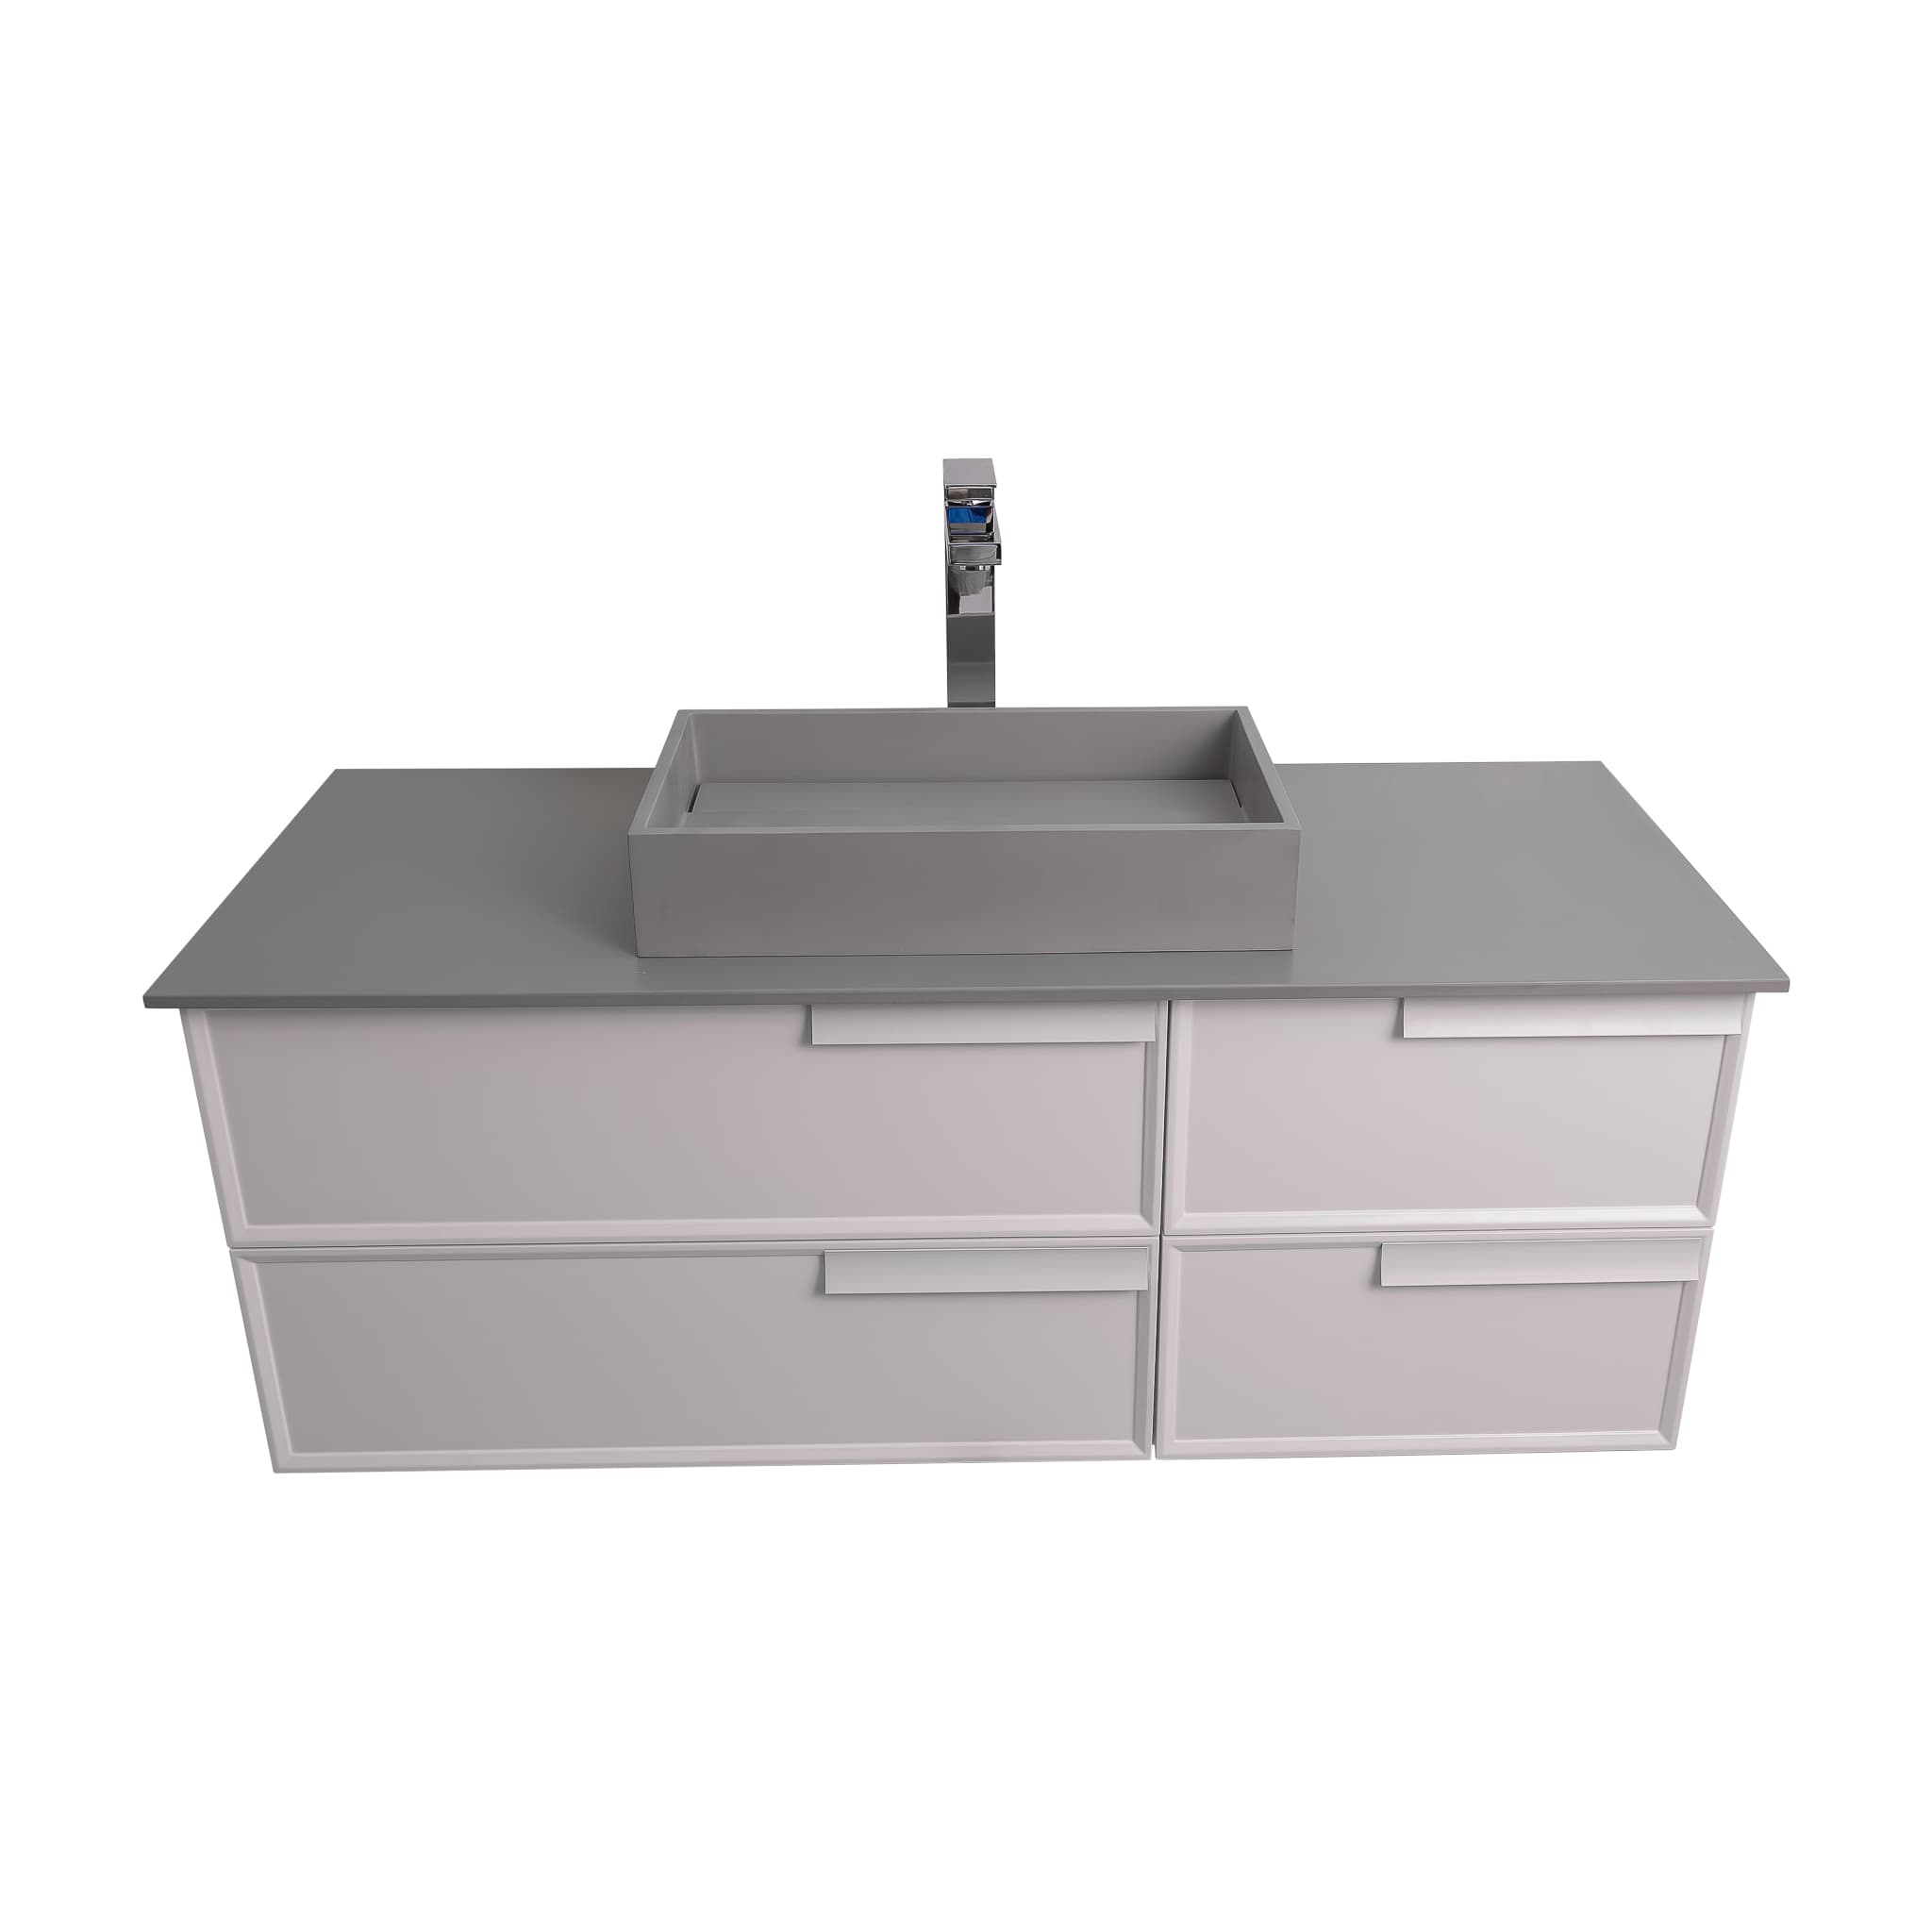 Garda 47.5 Matte White Cabinet, Solid Surface Flat Grey Counter and Infinity Square Solid Surface Grey Basin 1329, Wall Mounted Modern Vanity Set